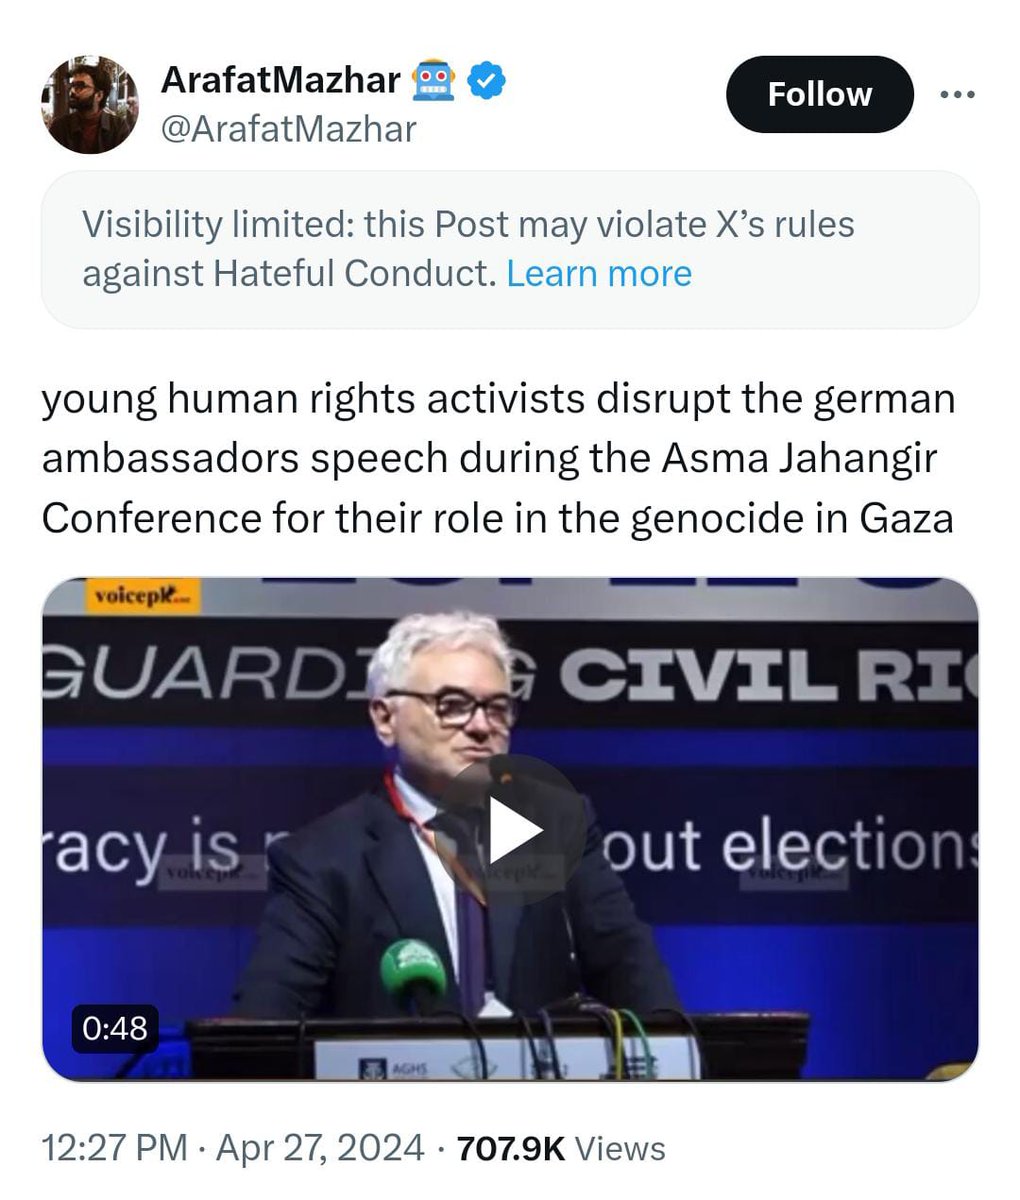 Whose hateful conduct? The unhinged racist outburst by @GermanyInPAK? Has he apologised yet? Have the #AJConference organizers?